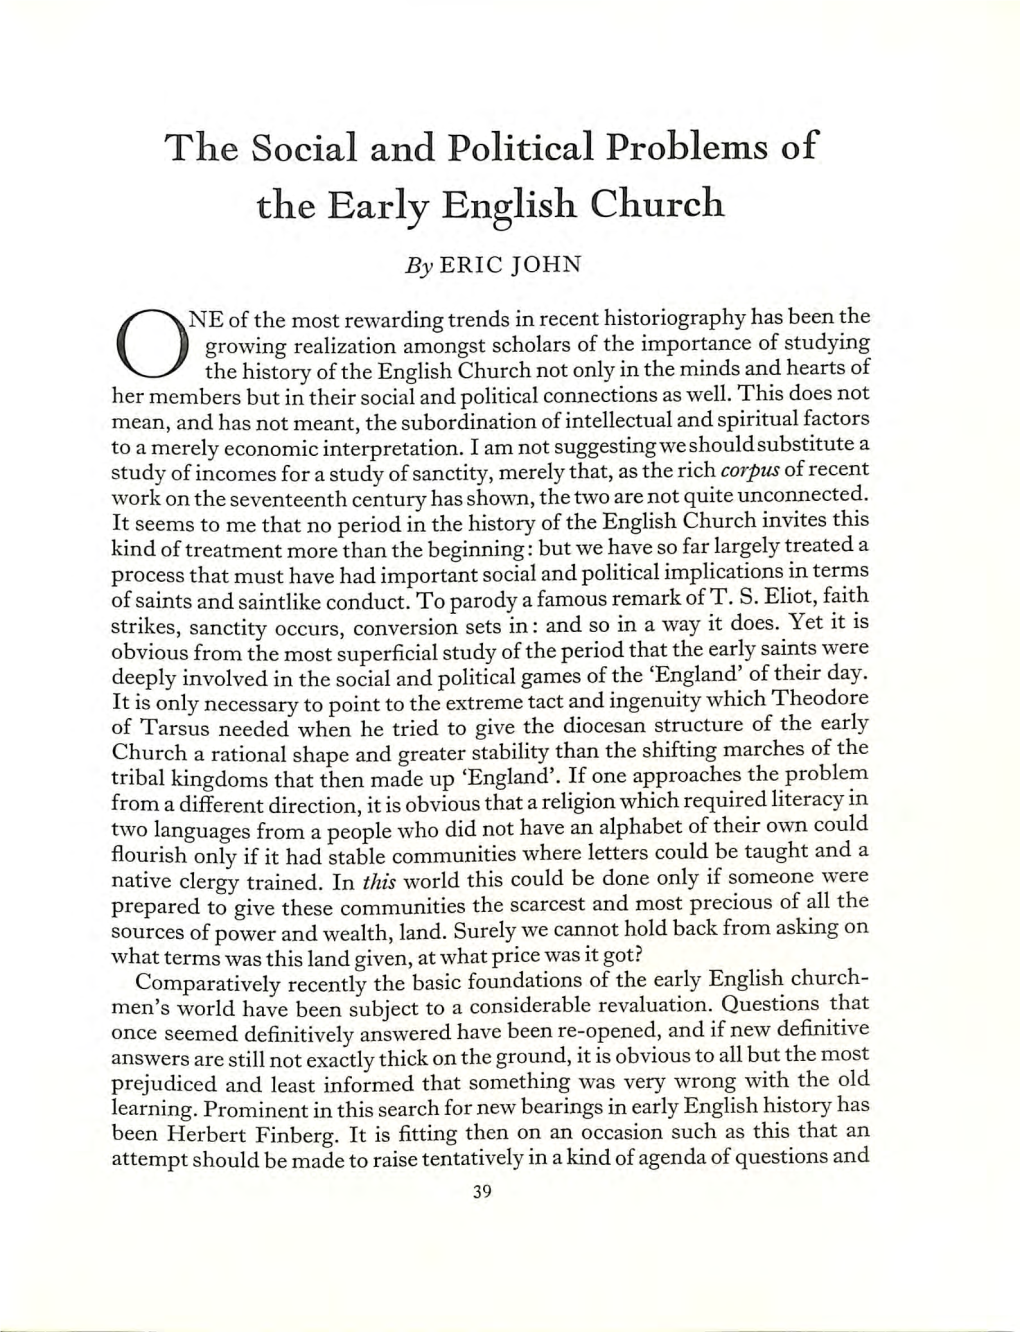 The Social and Political Problems of the Early English Church